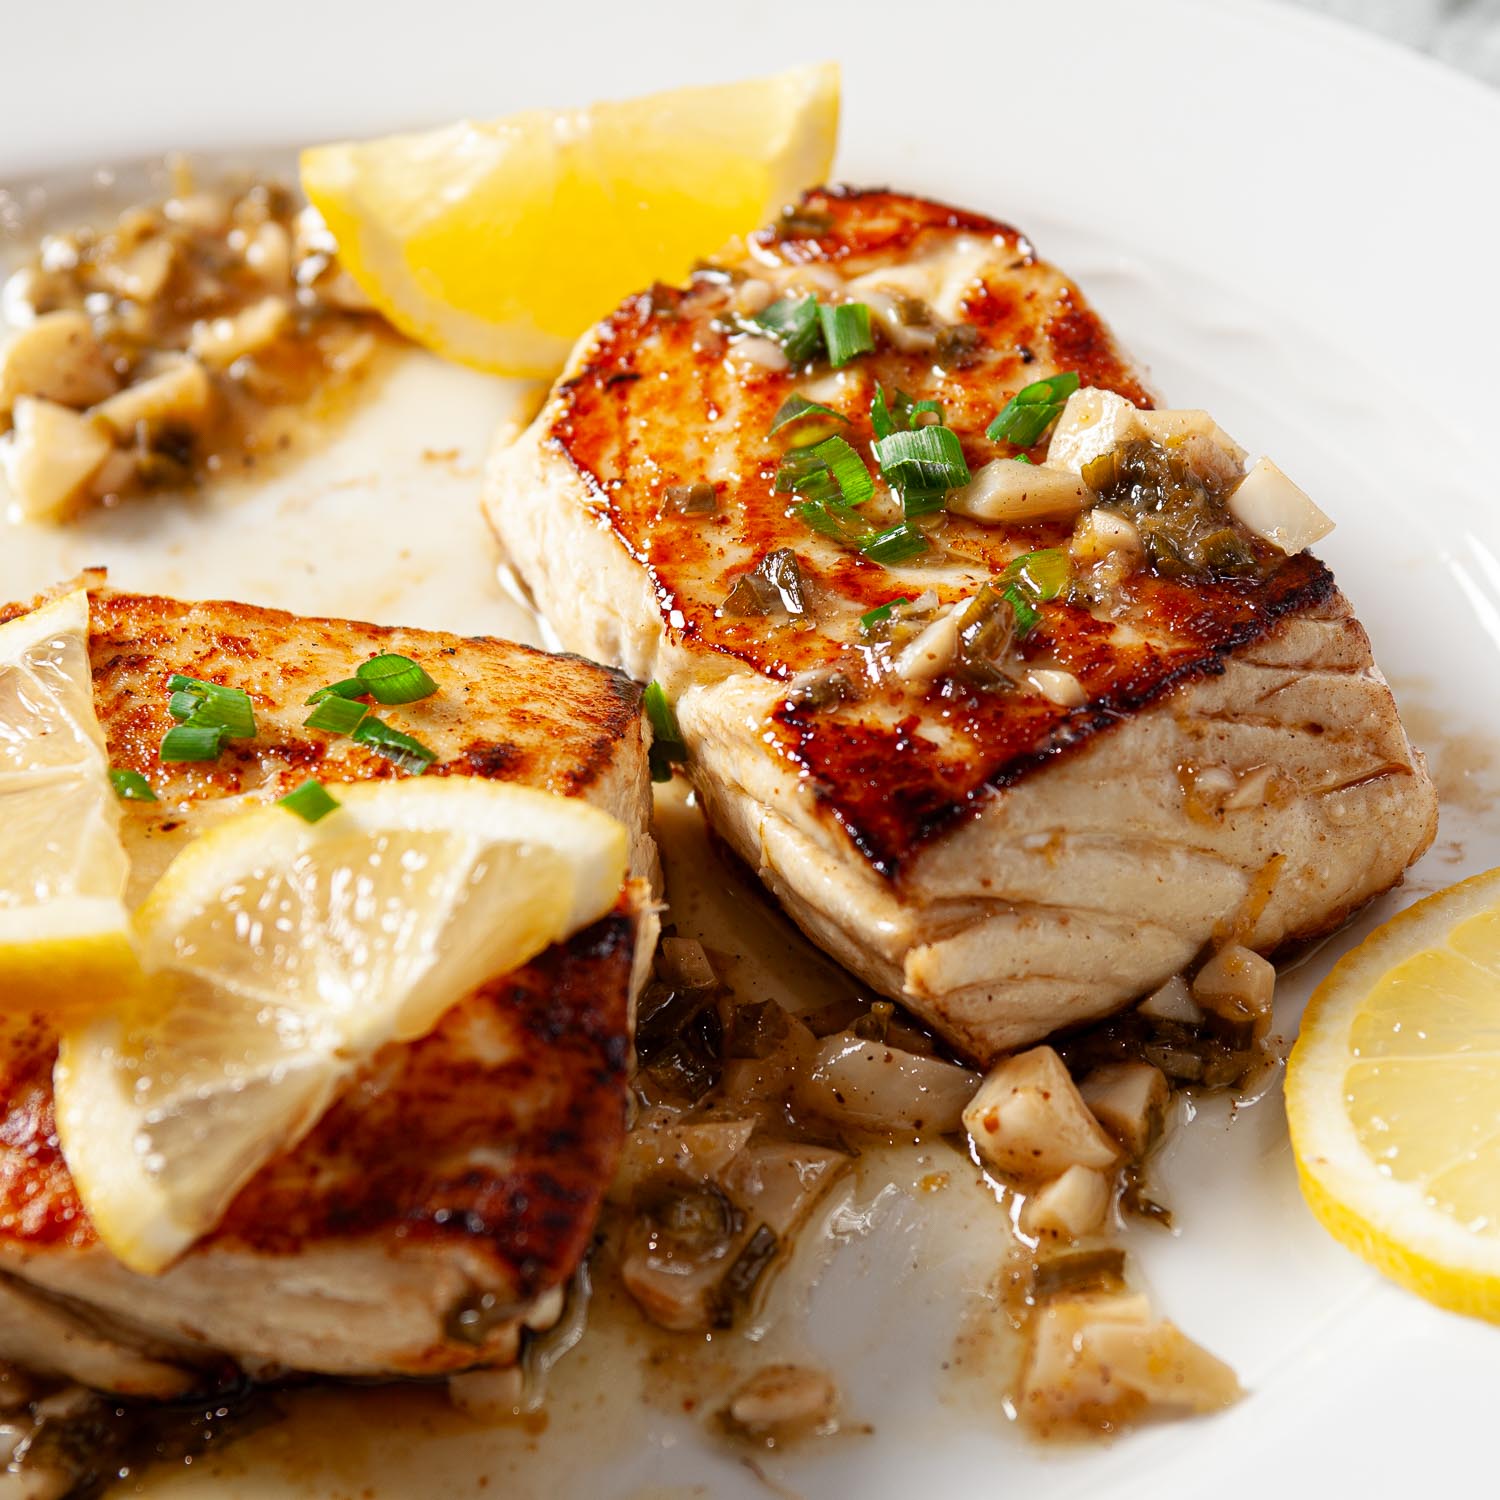 two seared halibut filets on a plate topped with lemon and garlic.